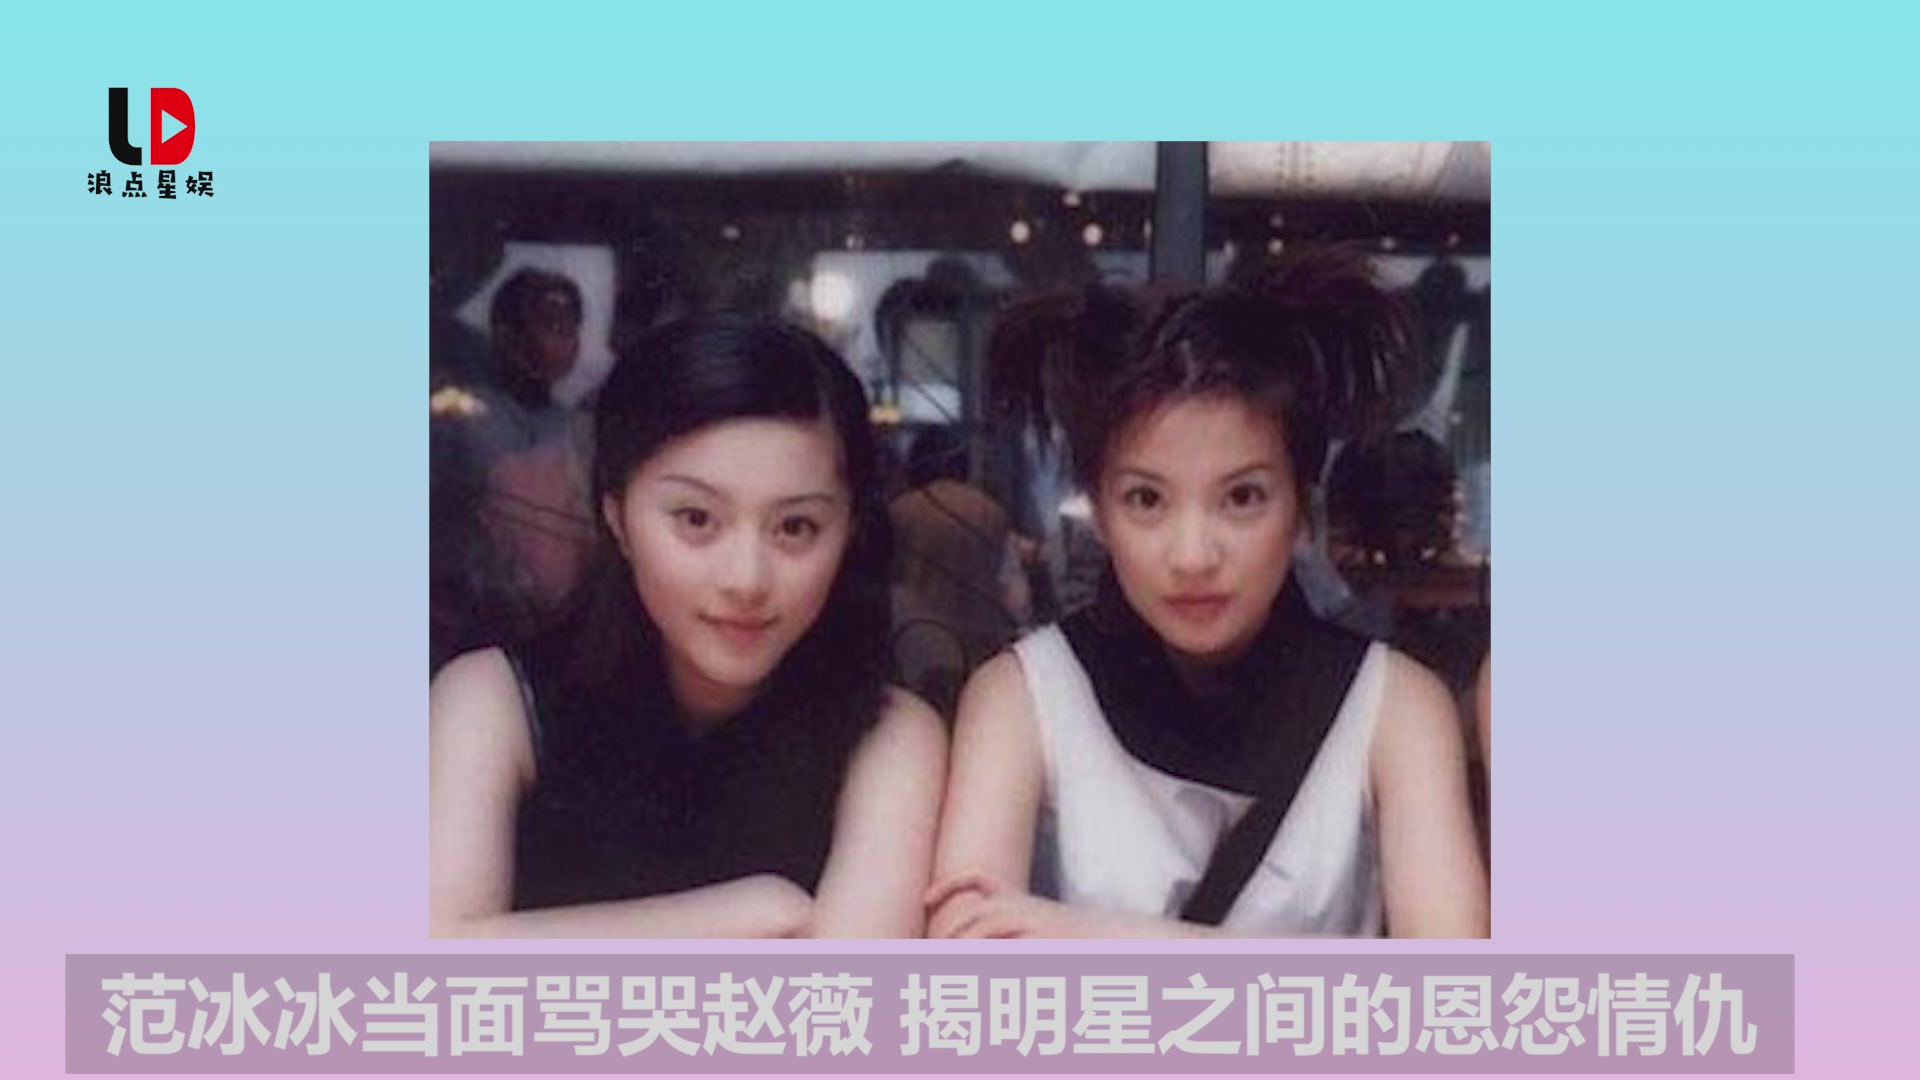 Fan Bingbing cursed Zhao Wei face to face and exposed the resentment and hatred between stars.